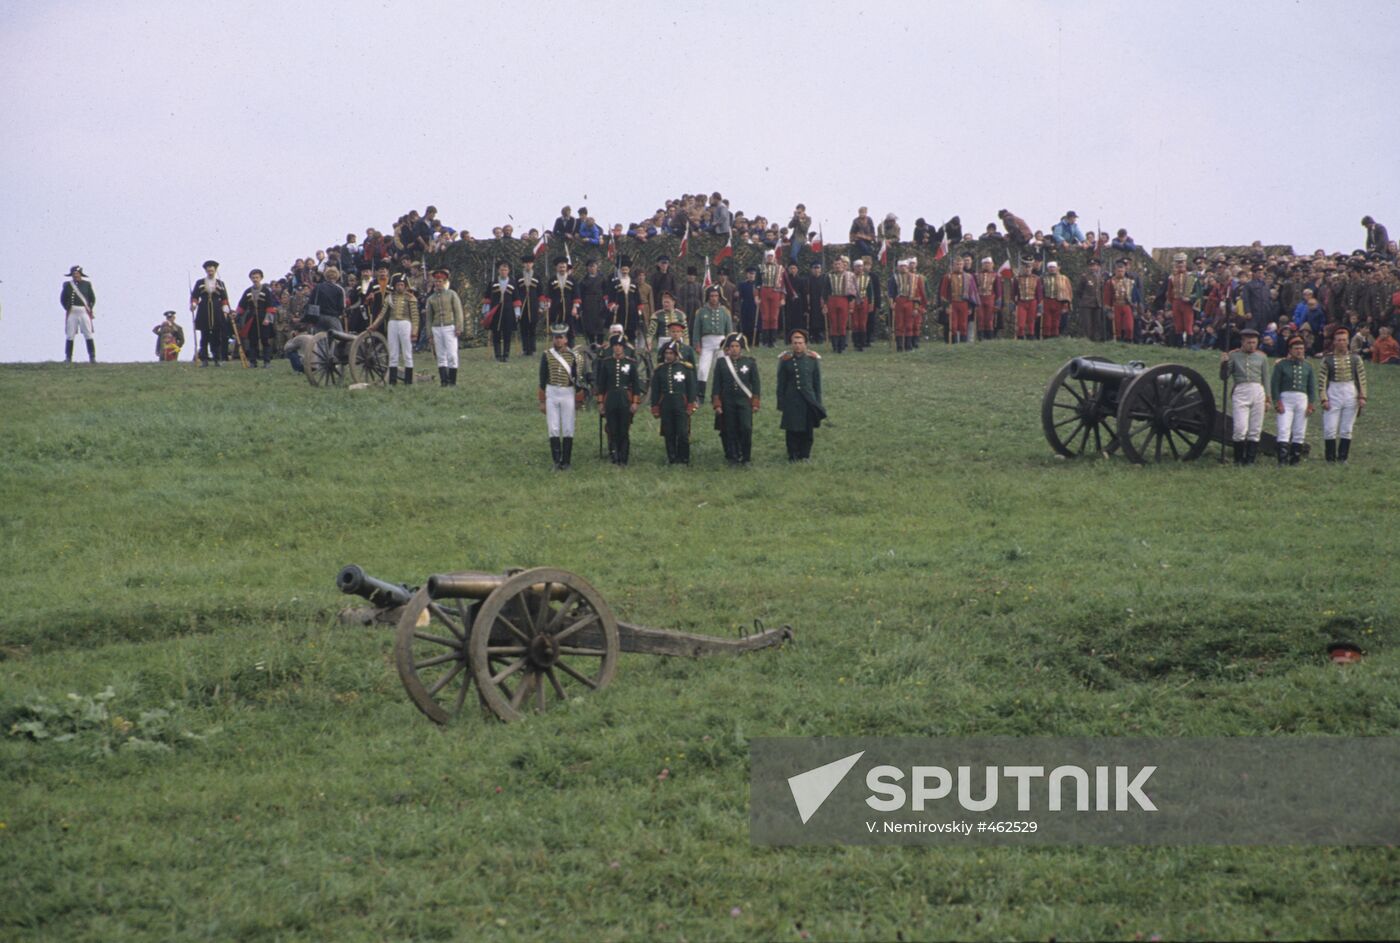 Part of the show reconstructing the Battle of Borodino